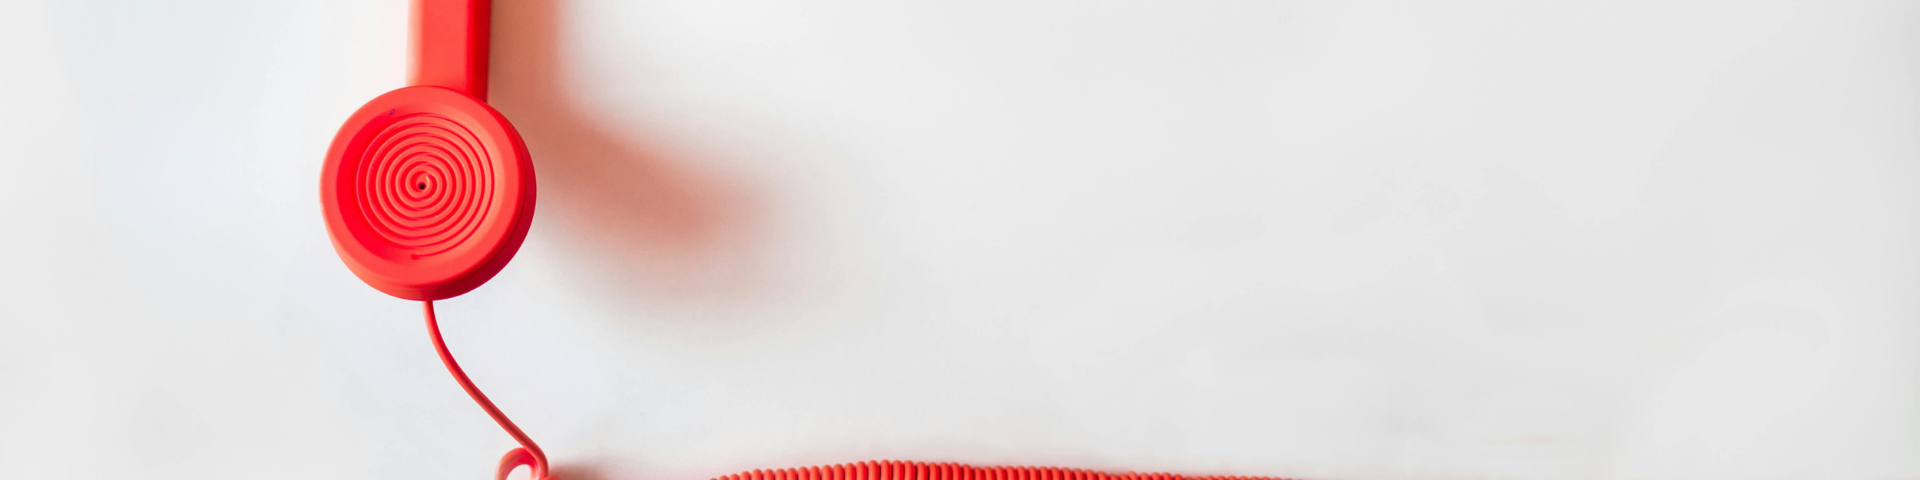 A red telephone receiver and cord